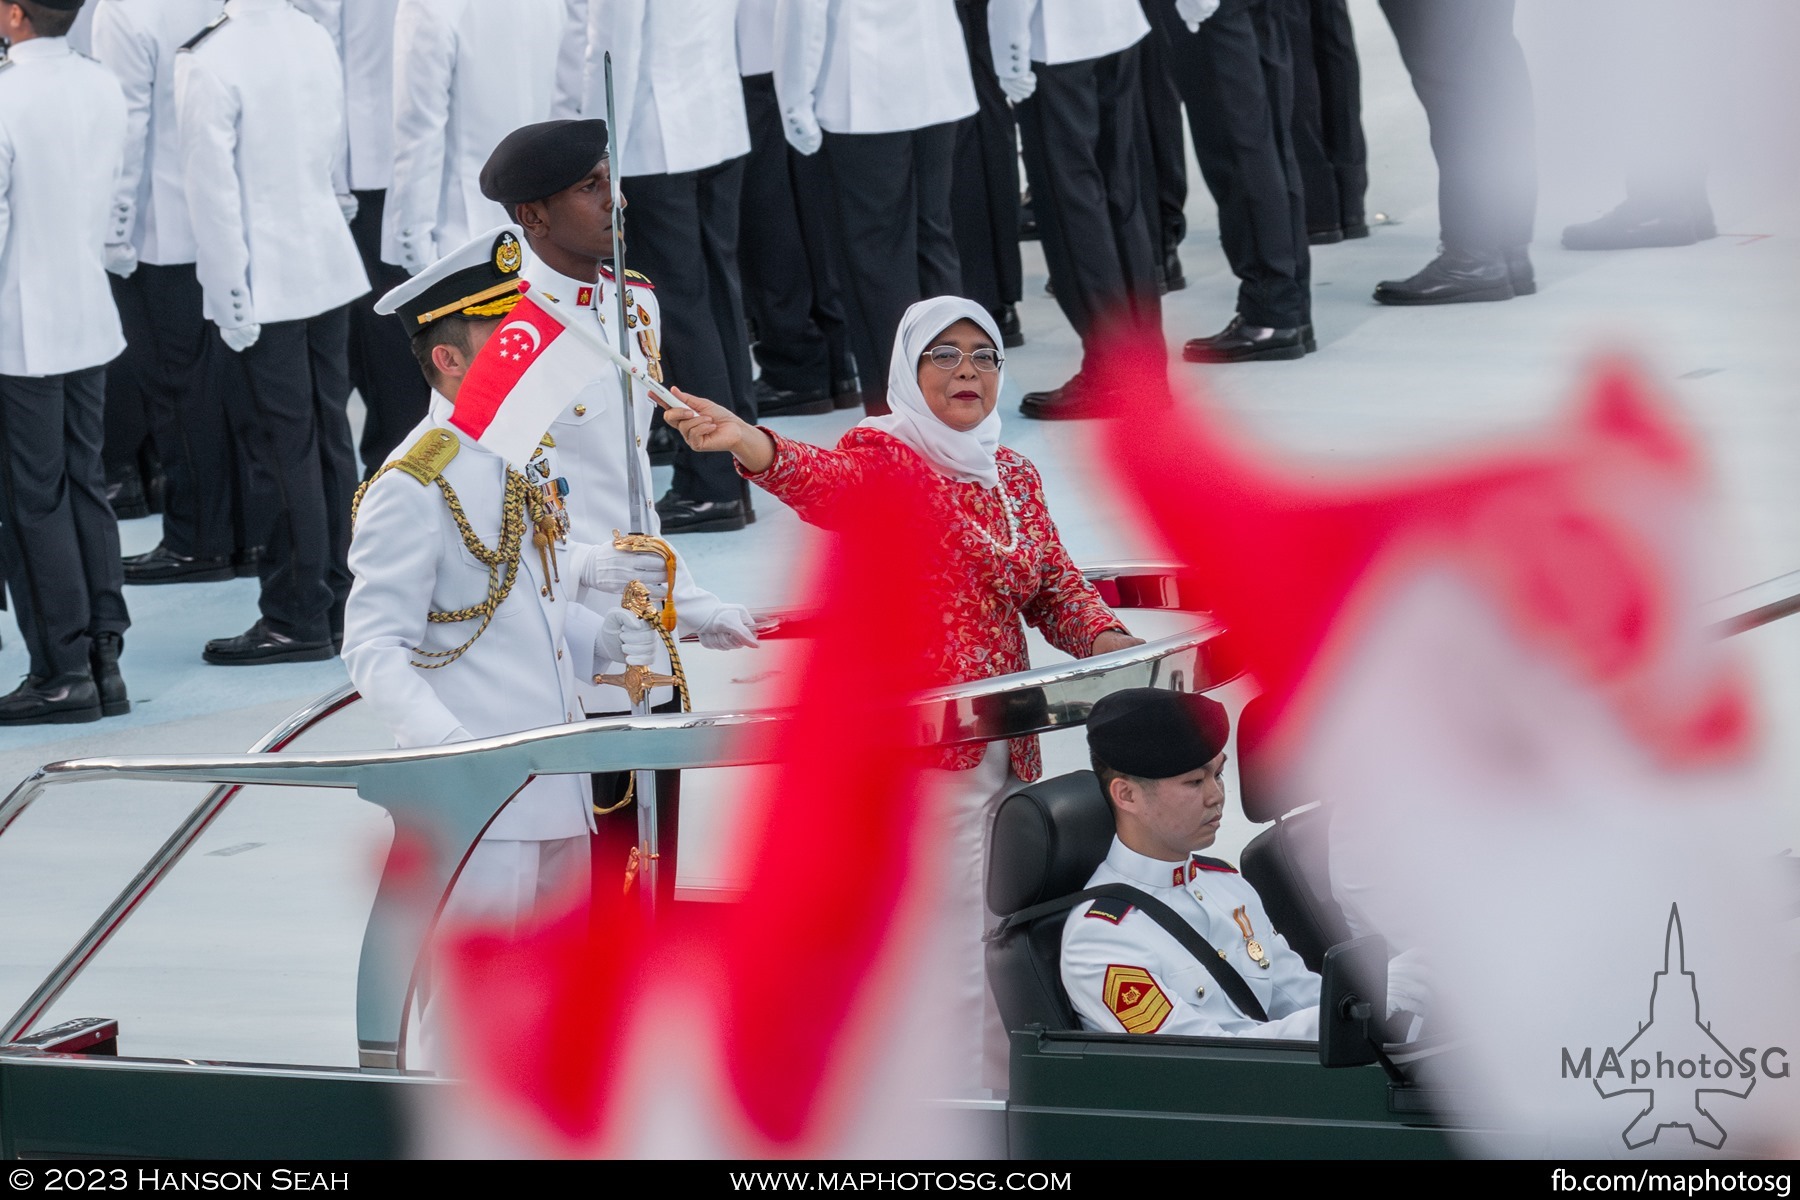 President of SIngapore, Mdm Halimah Yacob, waves to the crowd as she embarks on the ceremonial drive past.